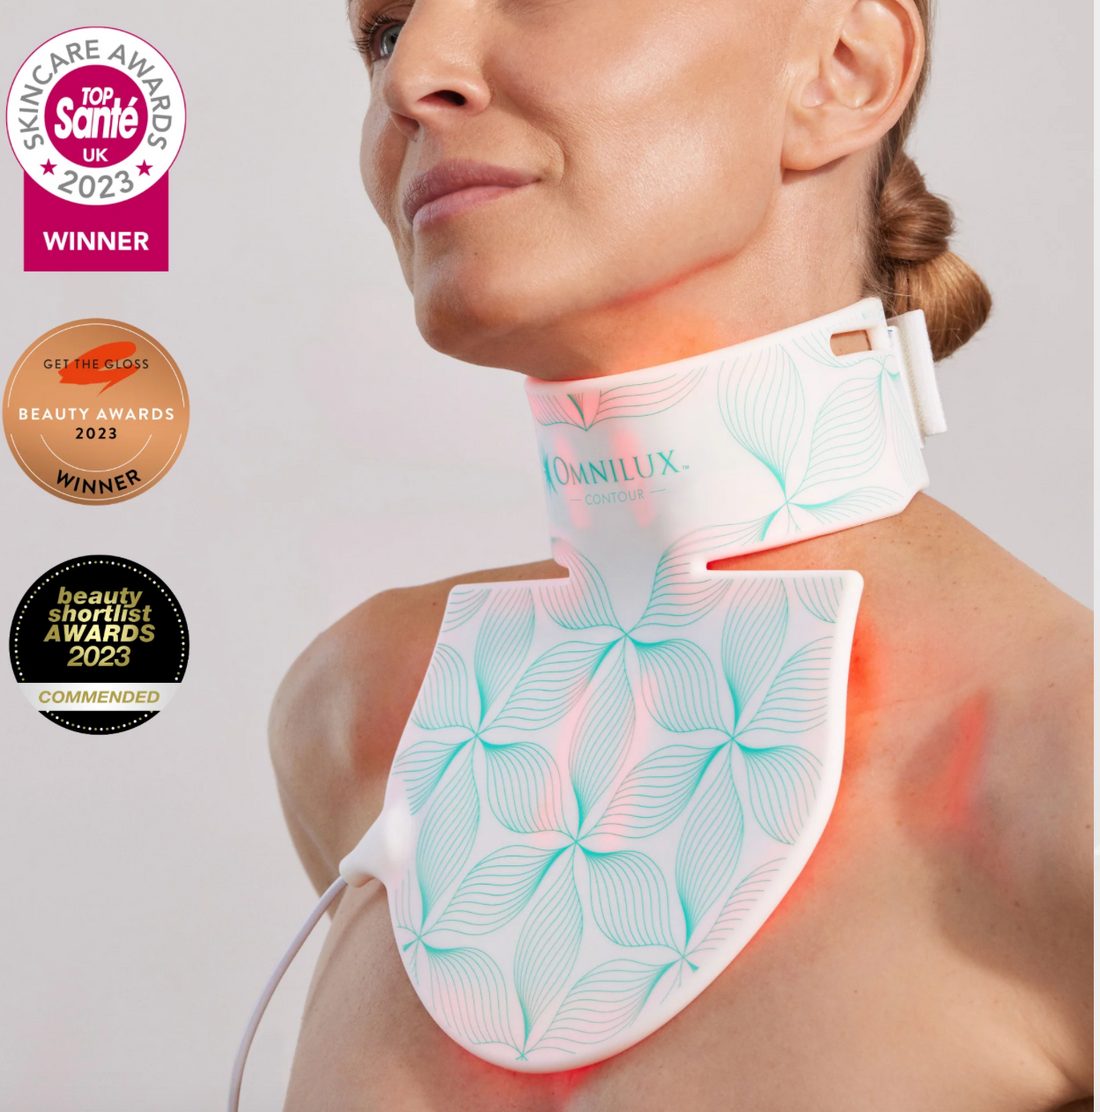 Omnilux Contour Neck Red Light Therapy